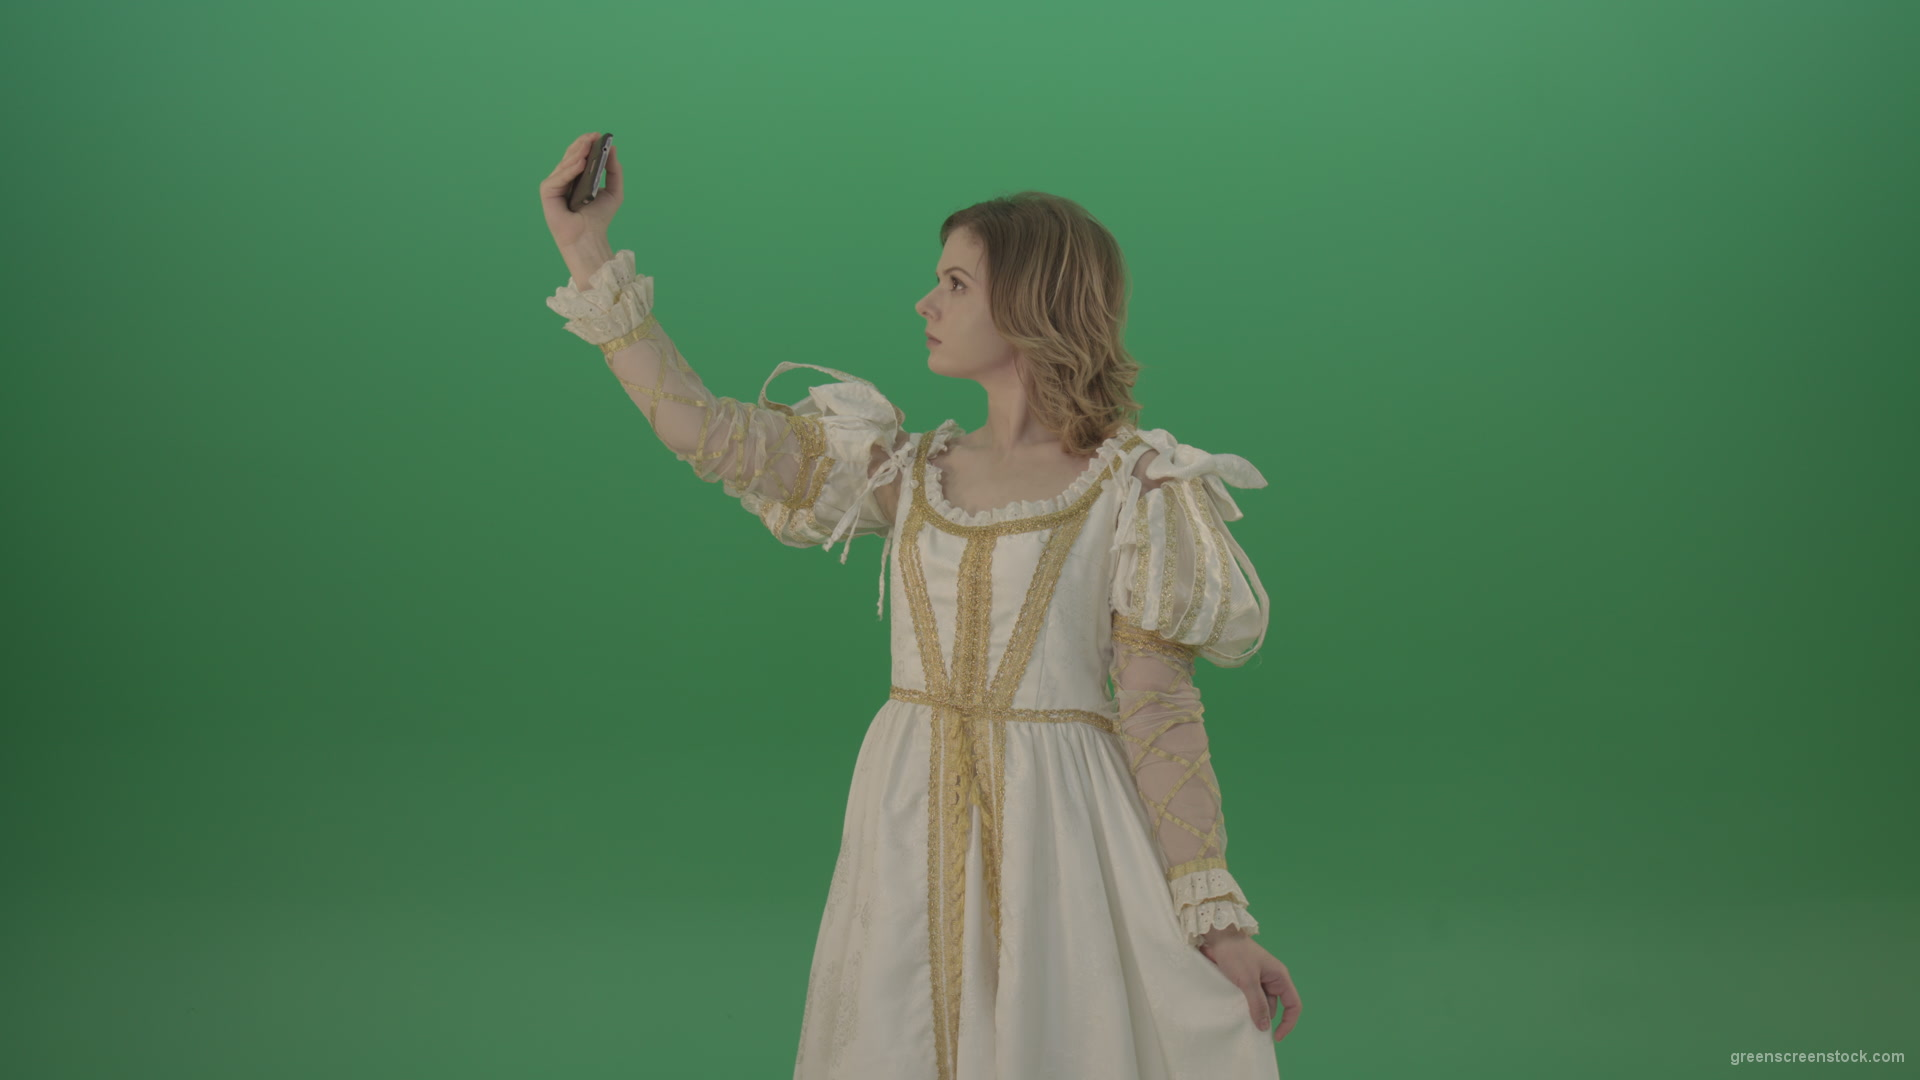 Princess-girl-dressed-in-a-light-suit-makes-a-sephi-on-a-modern-phone-isolated-on-chromakey-background_007 Green Screen Stock